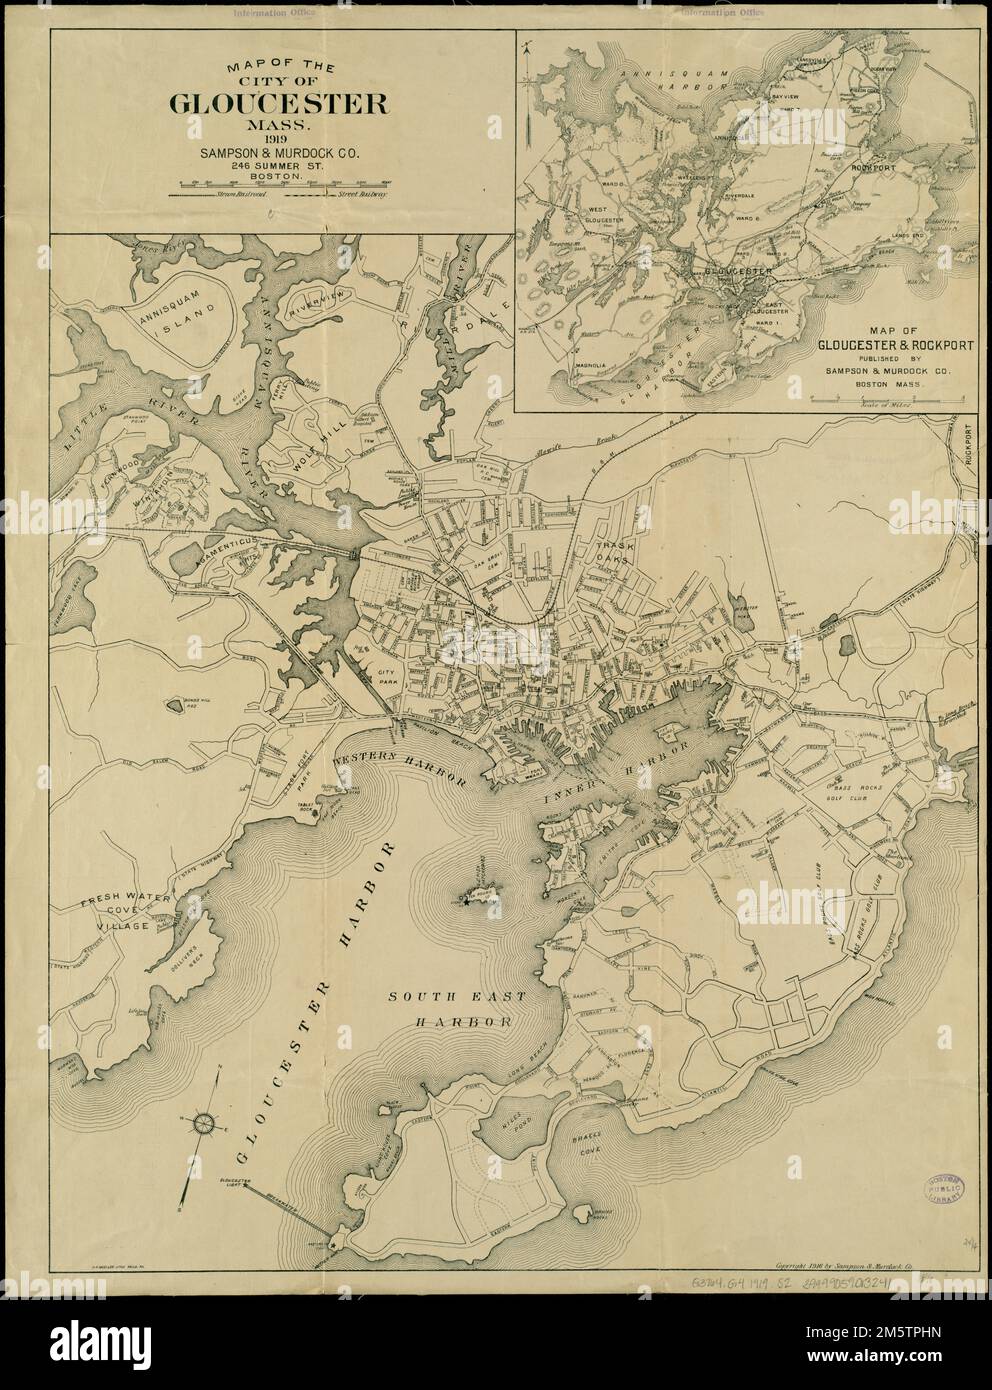 Map of the city of Gloucester, Mass. Oriented with north toward the upper right. Inset: Map of Gloucester & Rockport. Shows street railways and steam railroads.... , Massachusetts  , Essex  ,county   , Gloucester Massachusetts  , Essex  ,county   , Rockport Stock Photo